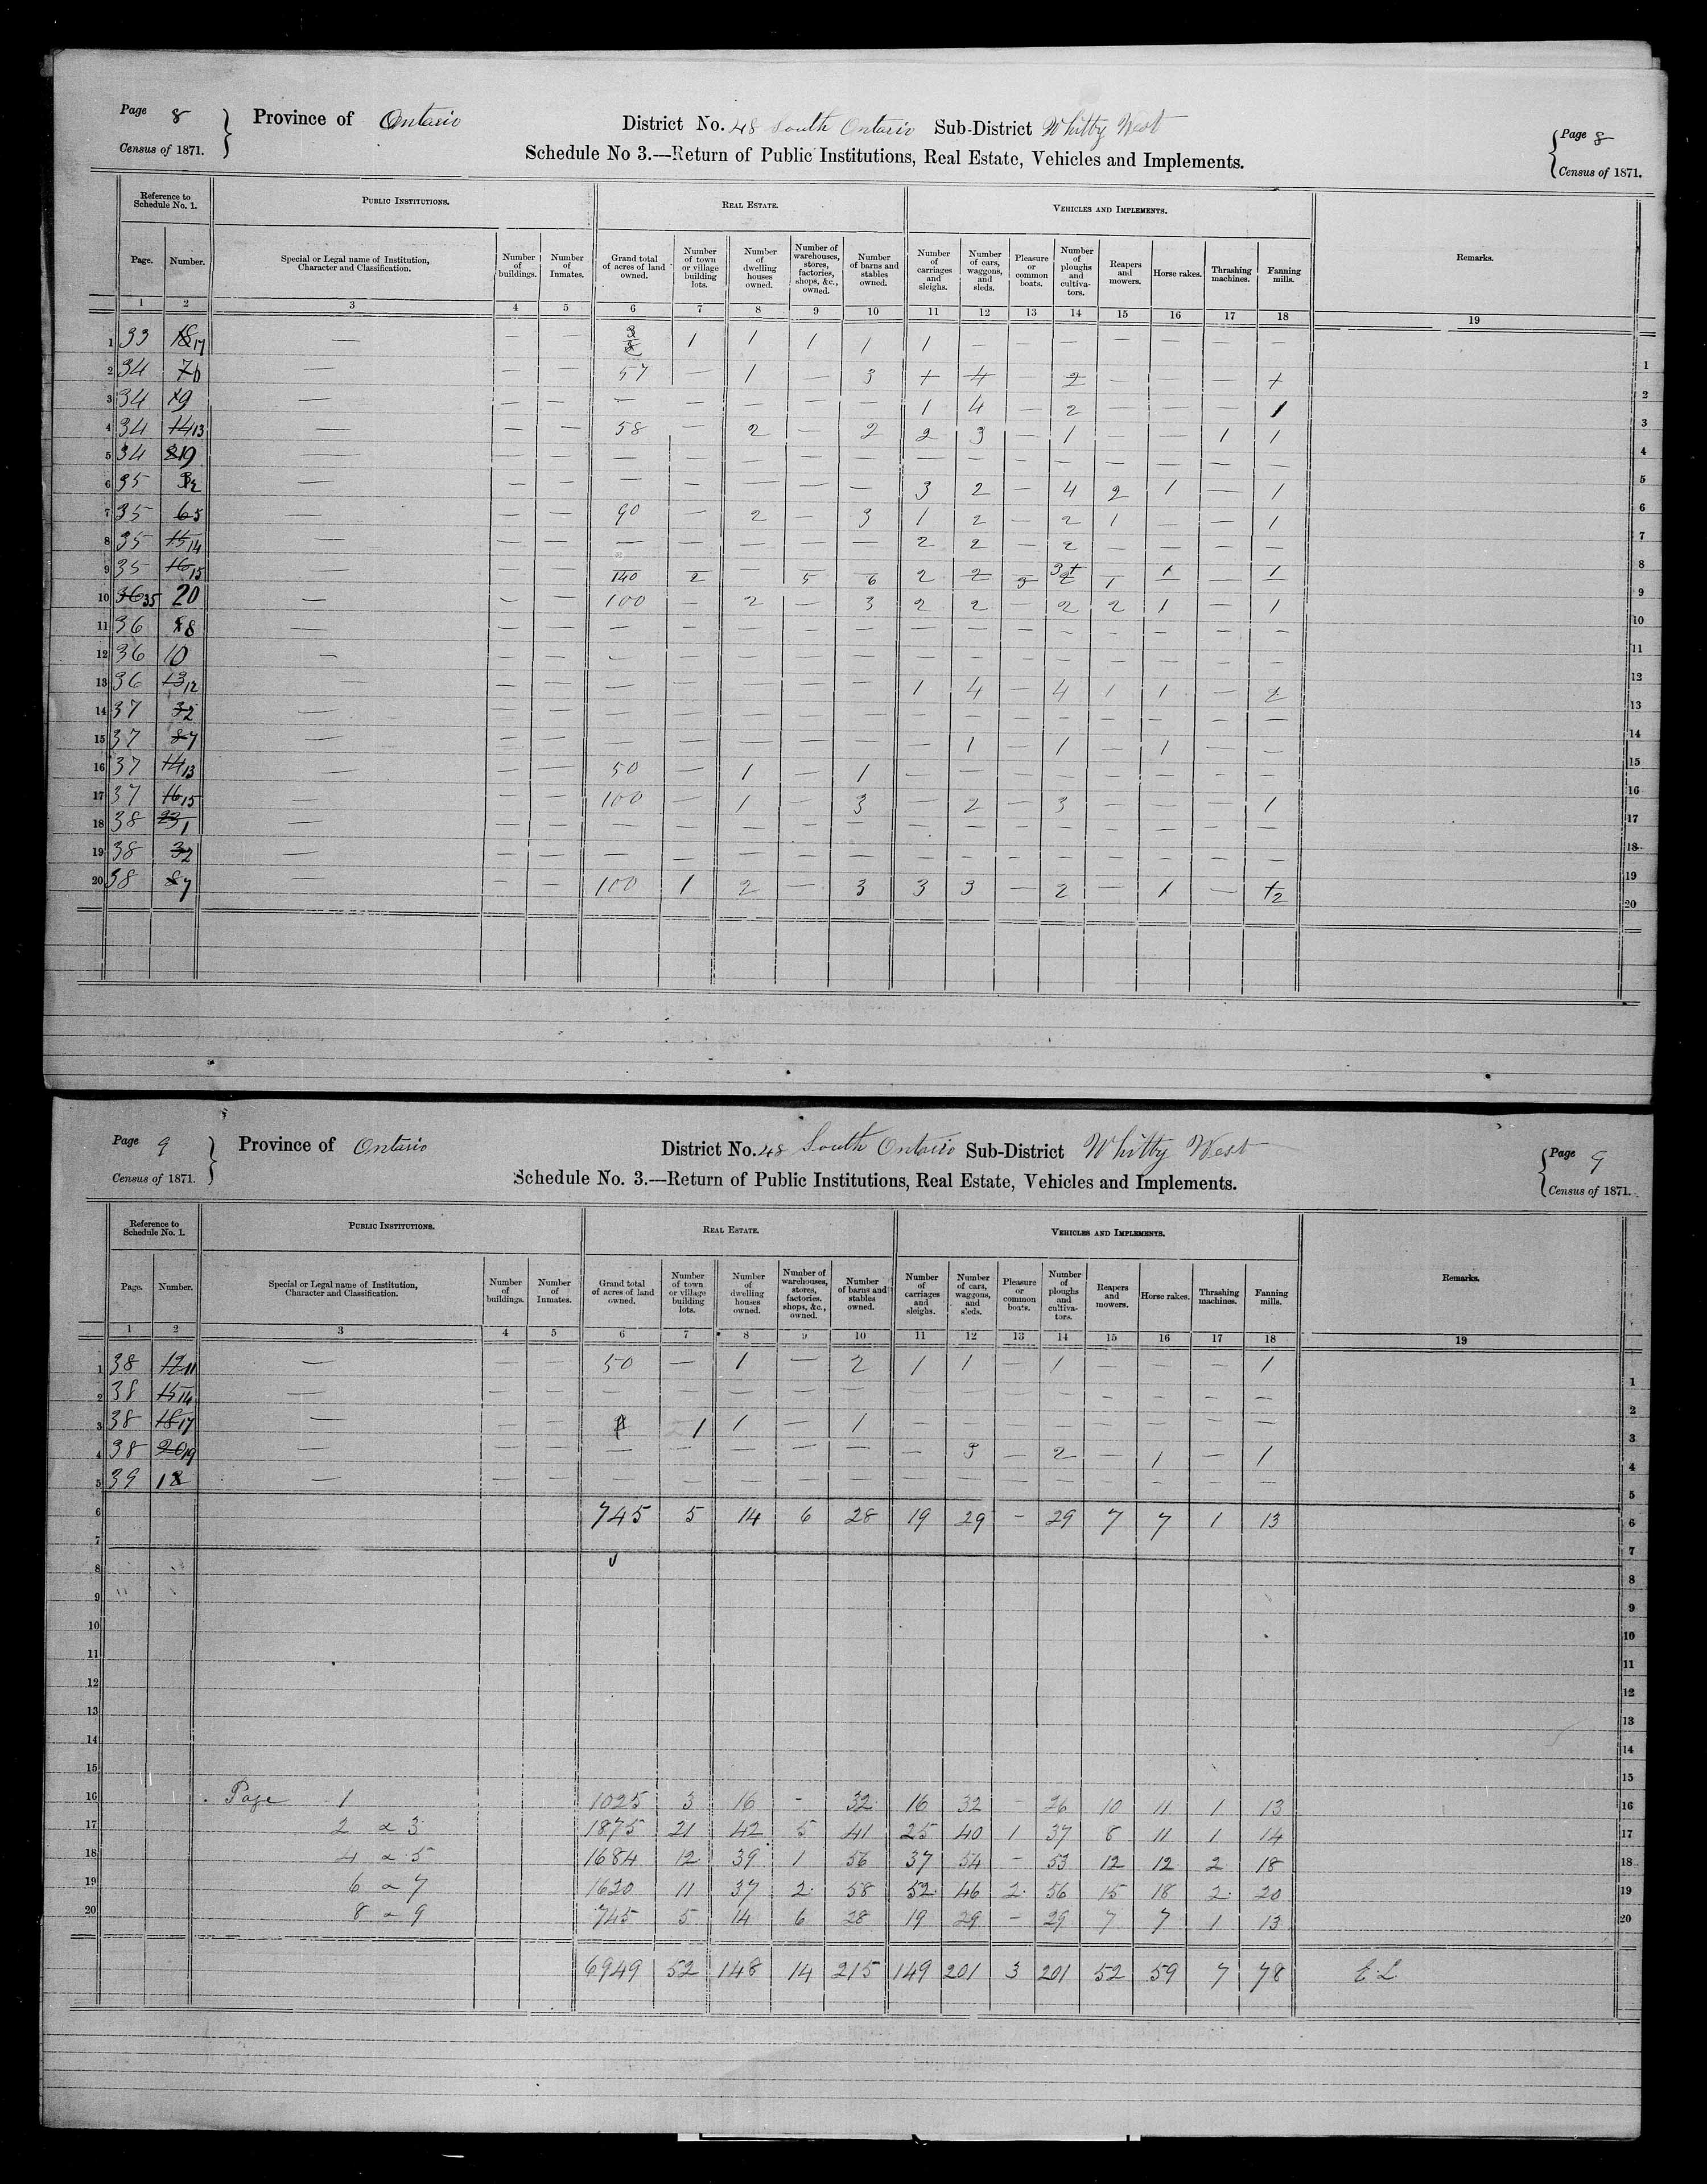 Title: Census of Canada, 1871 - Mikan Number: 142105 - Microform: c-9974